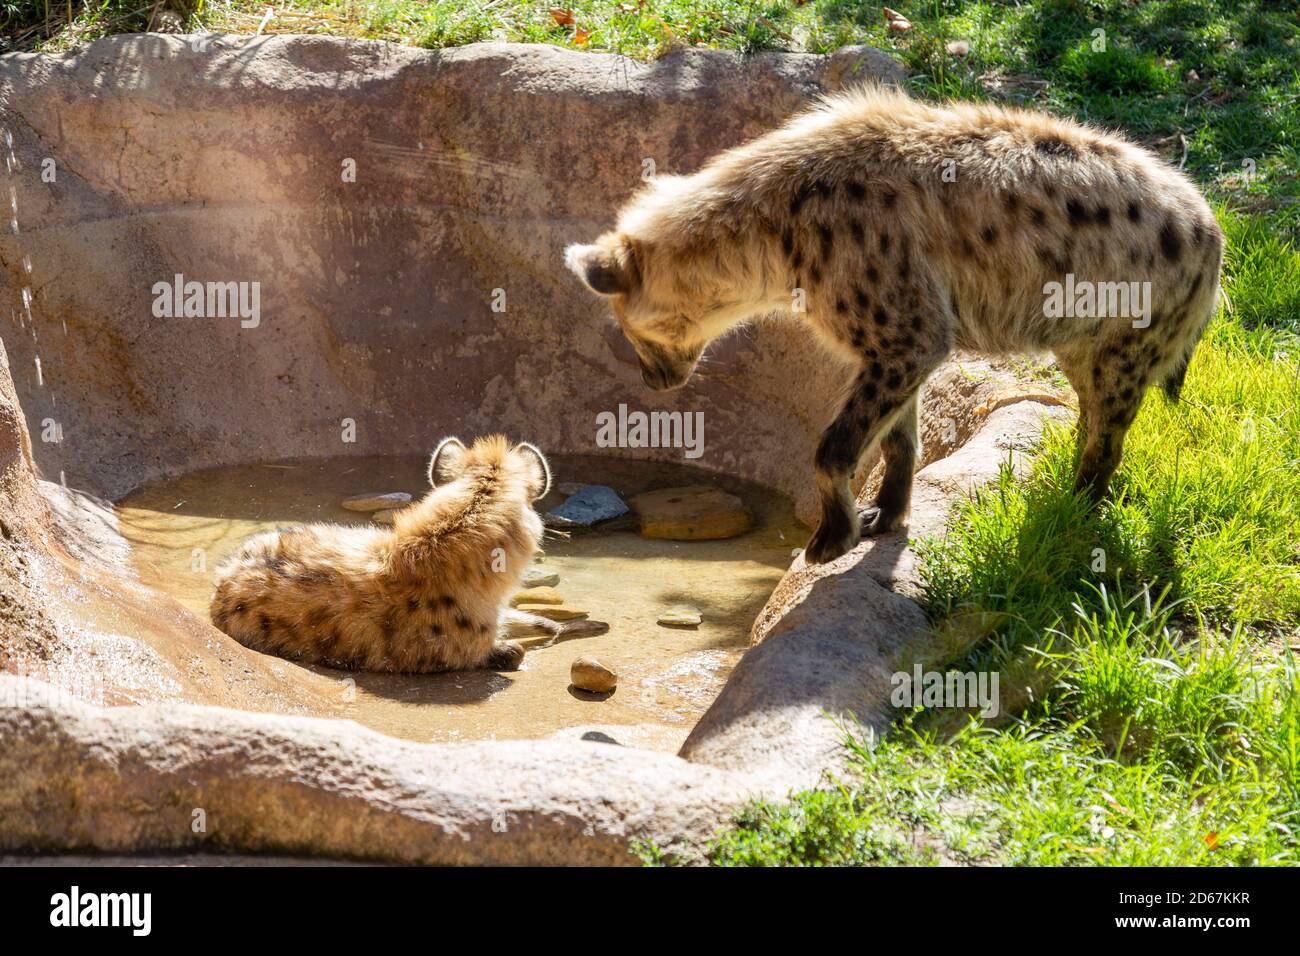 Two hyenas in their exhibit at the Fort Wayne Children's Zoo in Fort Wayne, Indiana, USA. Stock Photo